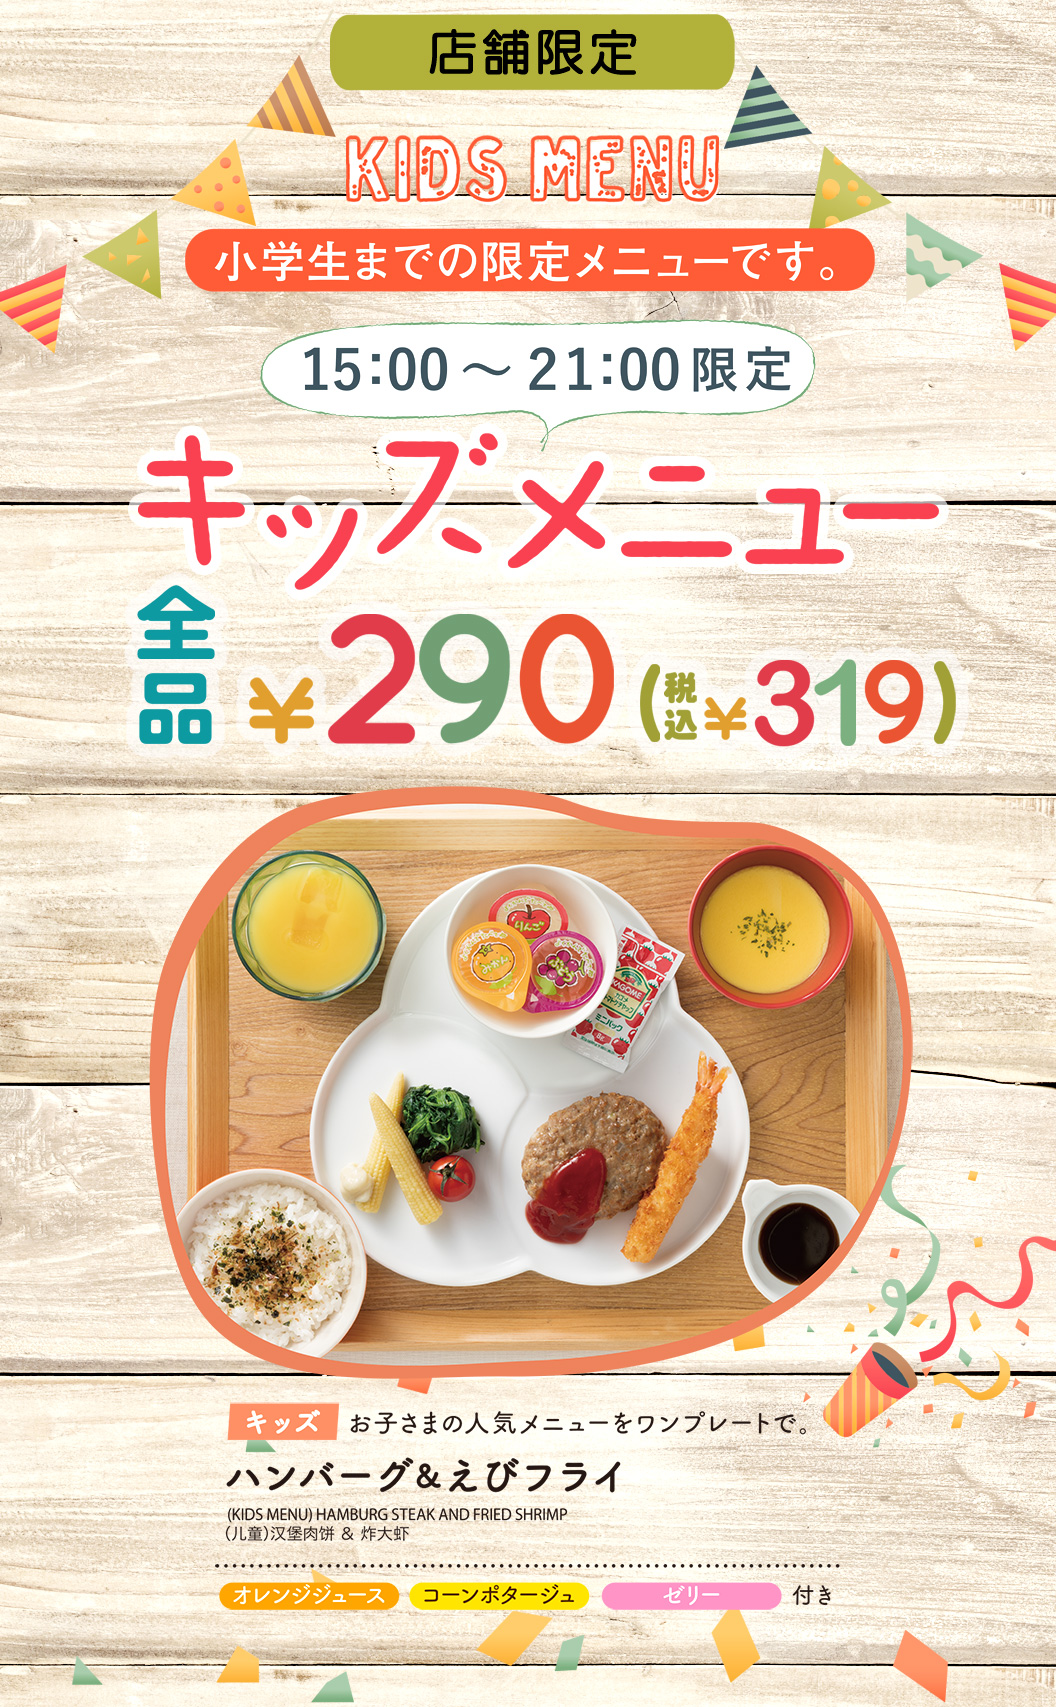 [Store limited] All KIDS MENUS items ¥290 (¥319 including tax) Popular menu items of Hamburgr and fried shrimp on one plate, orange juice, corn potage, and jelly included